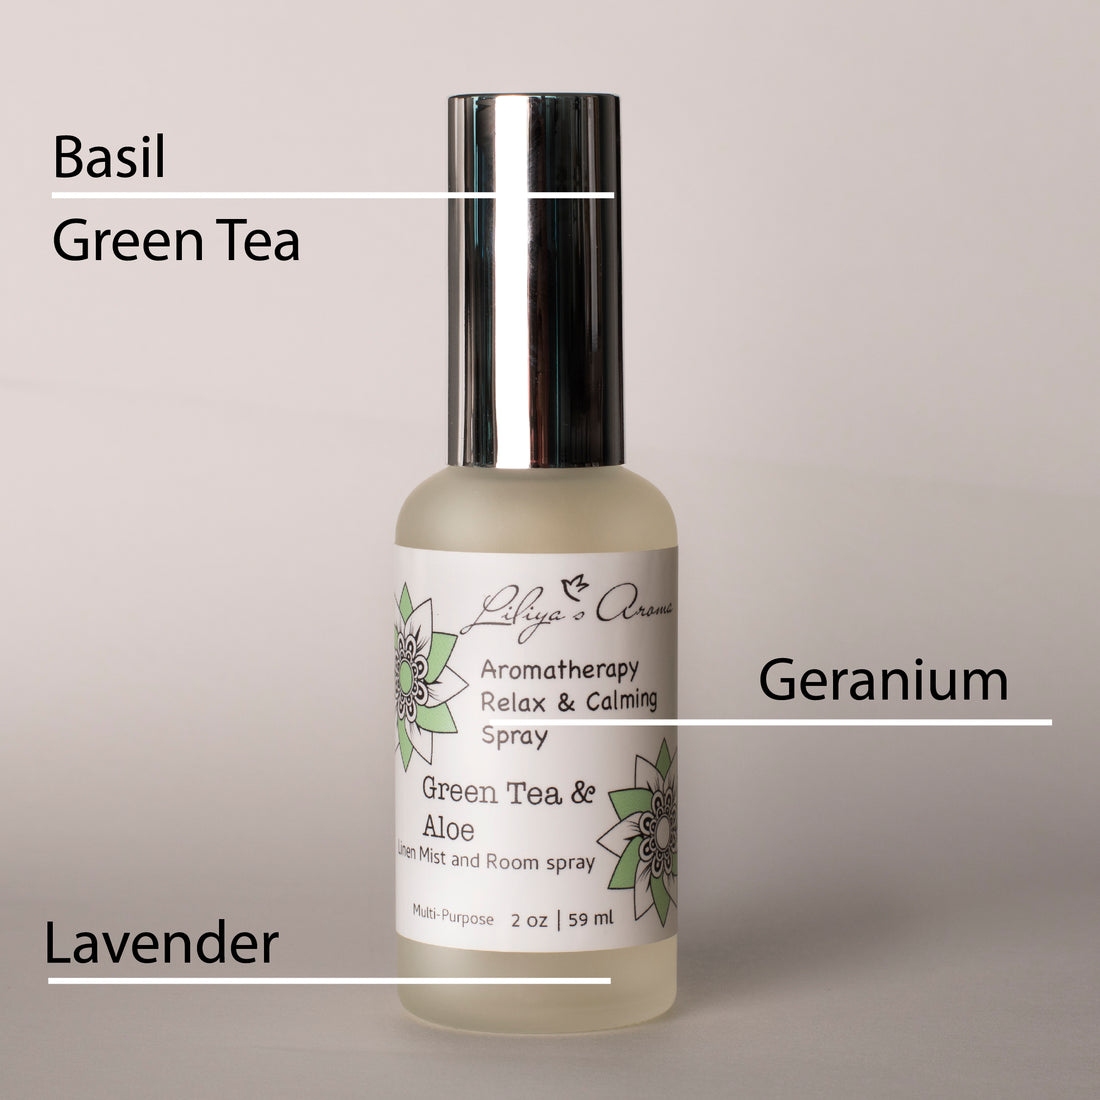 Aromatherapy Relax and Calming Spray with Green Tea, Aloe Essential Oils 2oz| 59ml